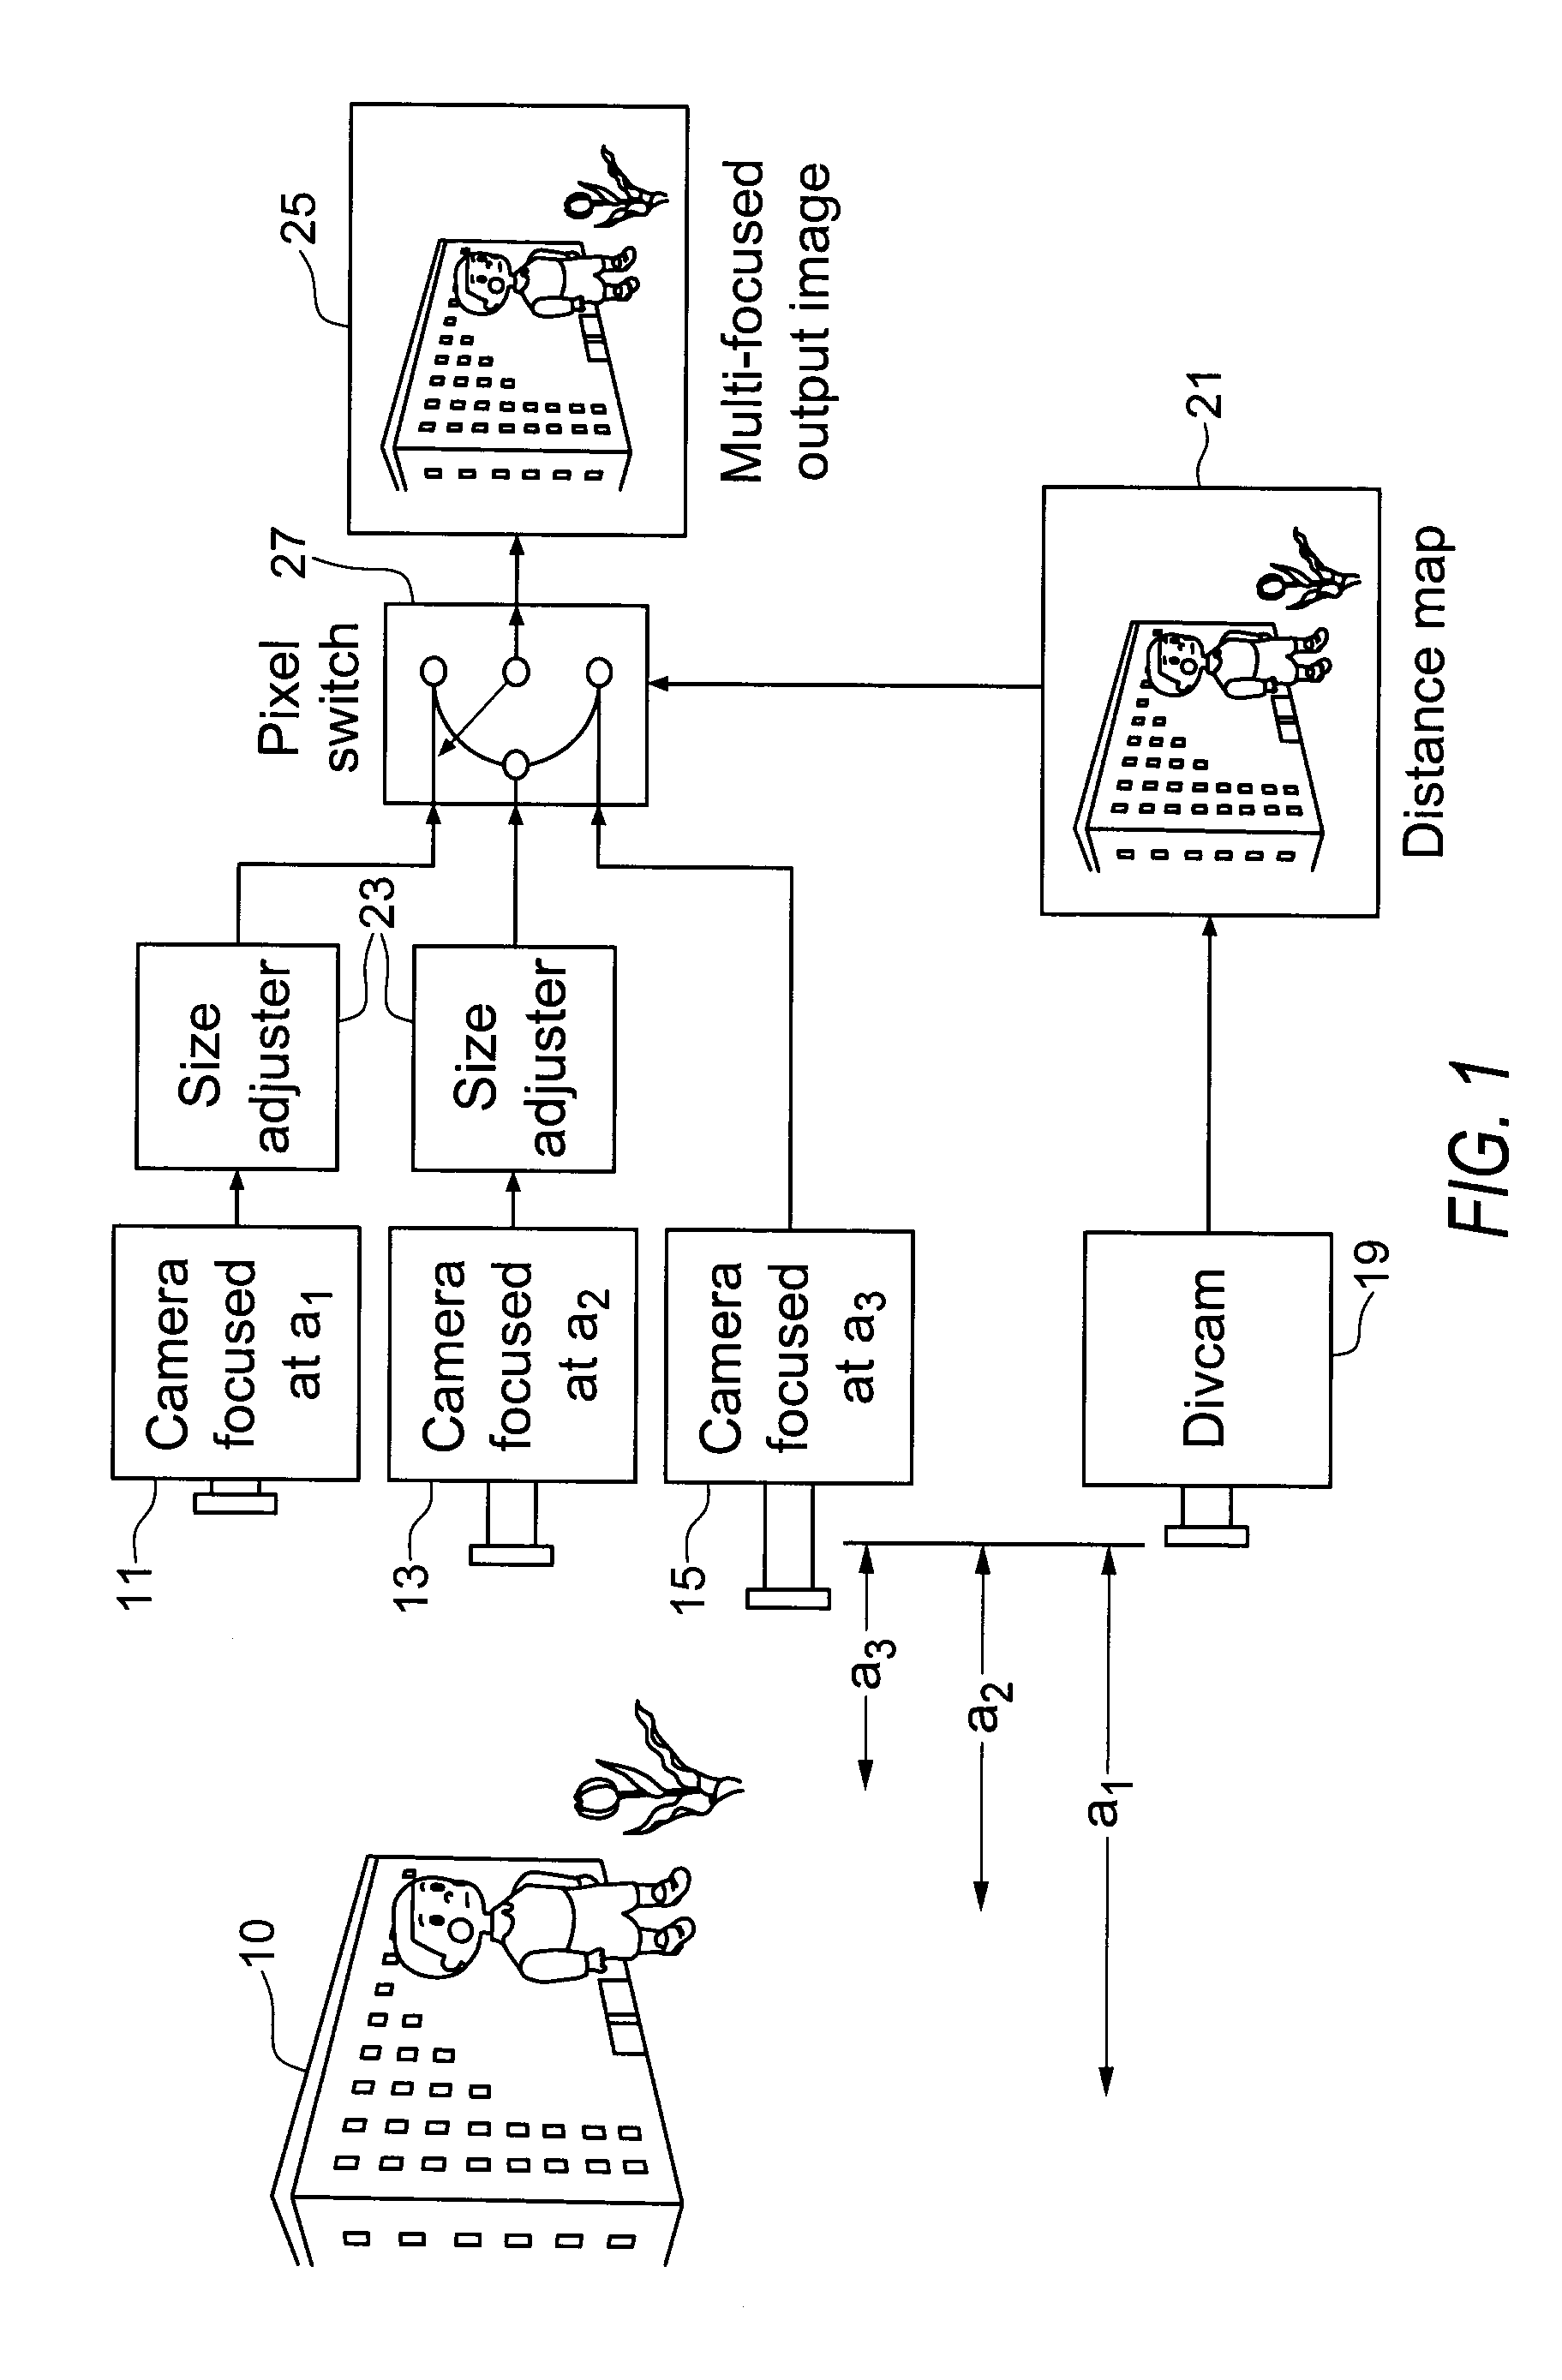 Camera system and method for amalgamating images to create an omni-focused image